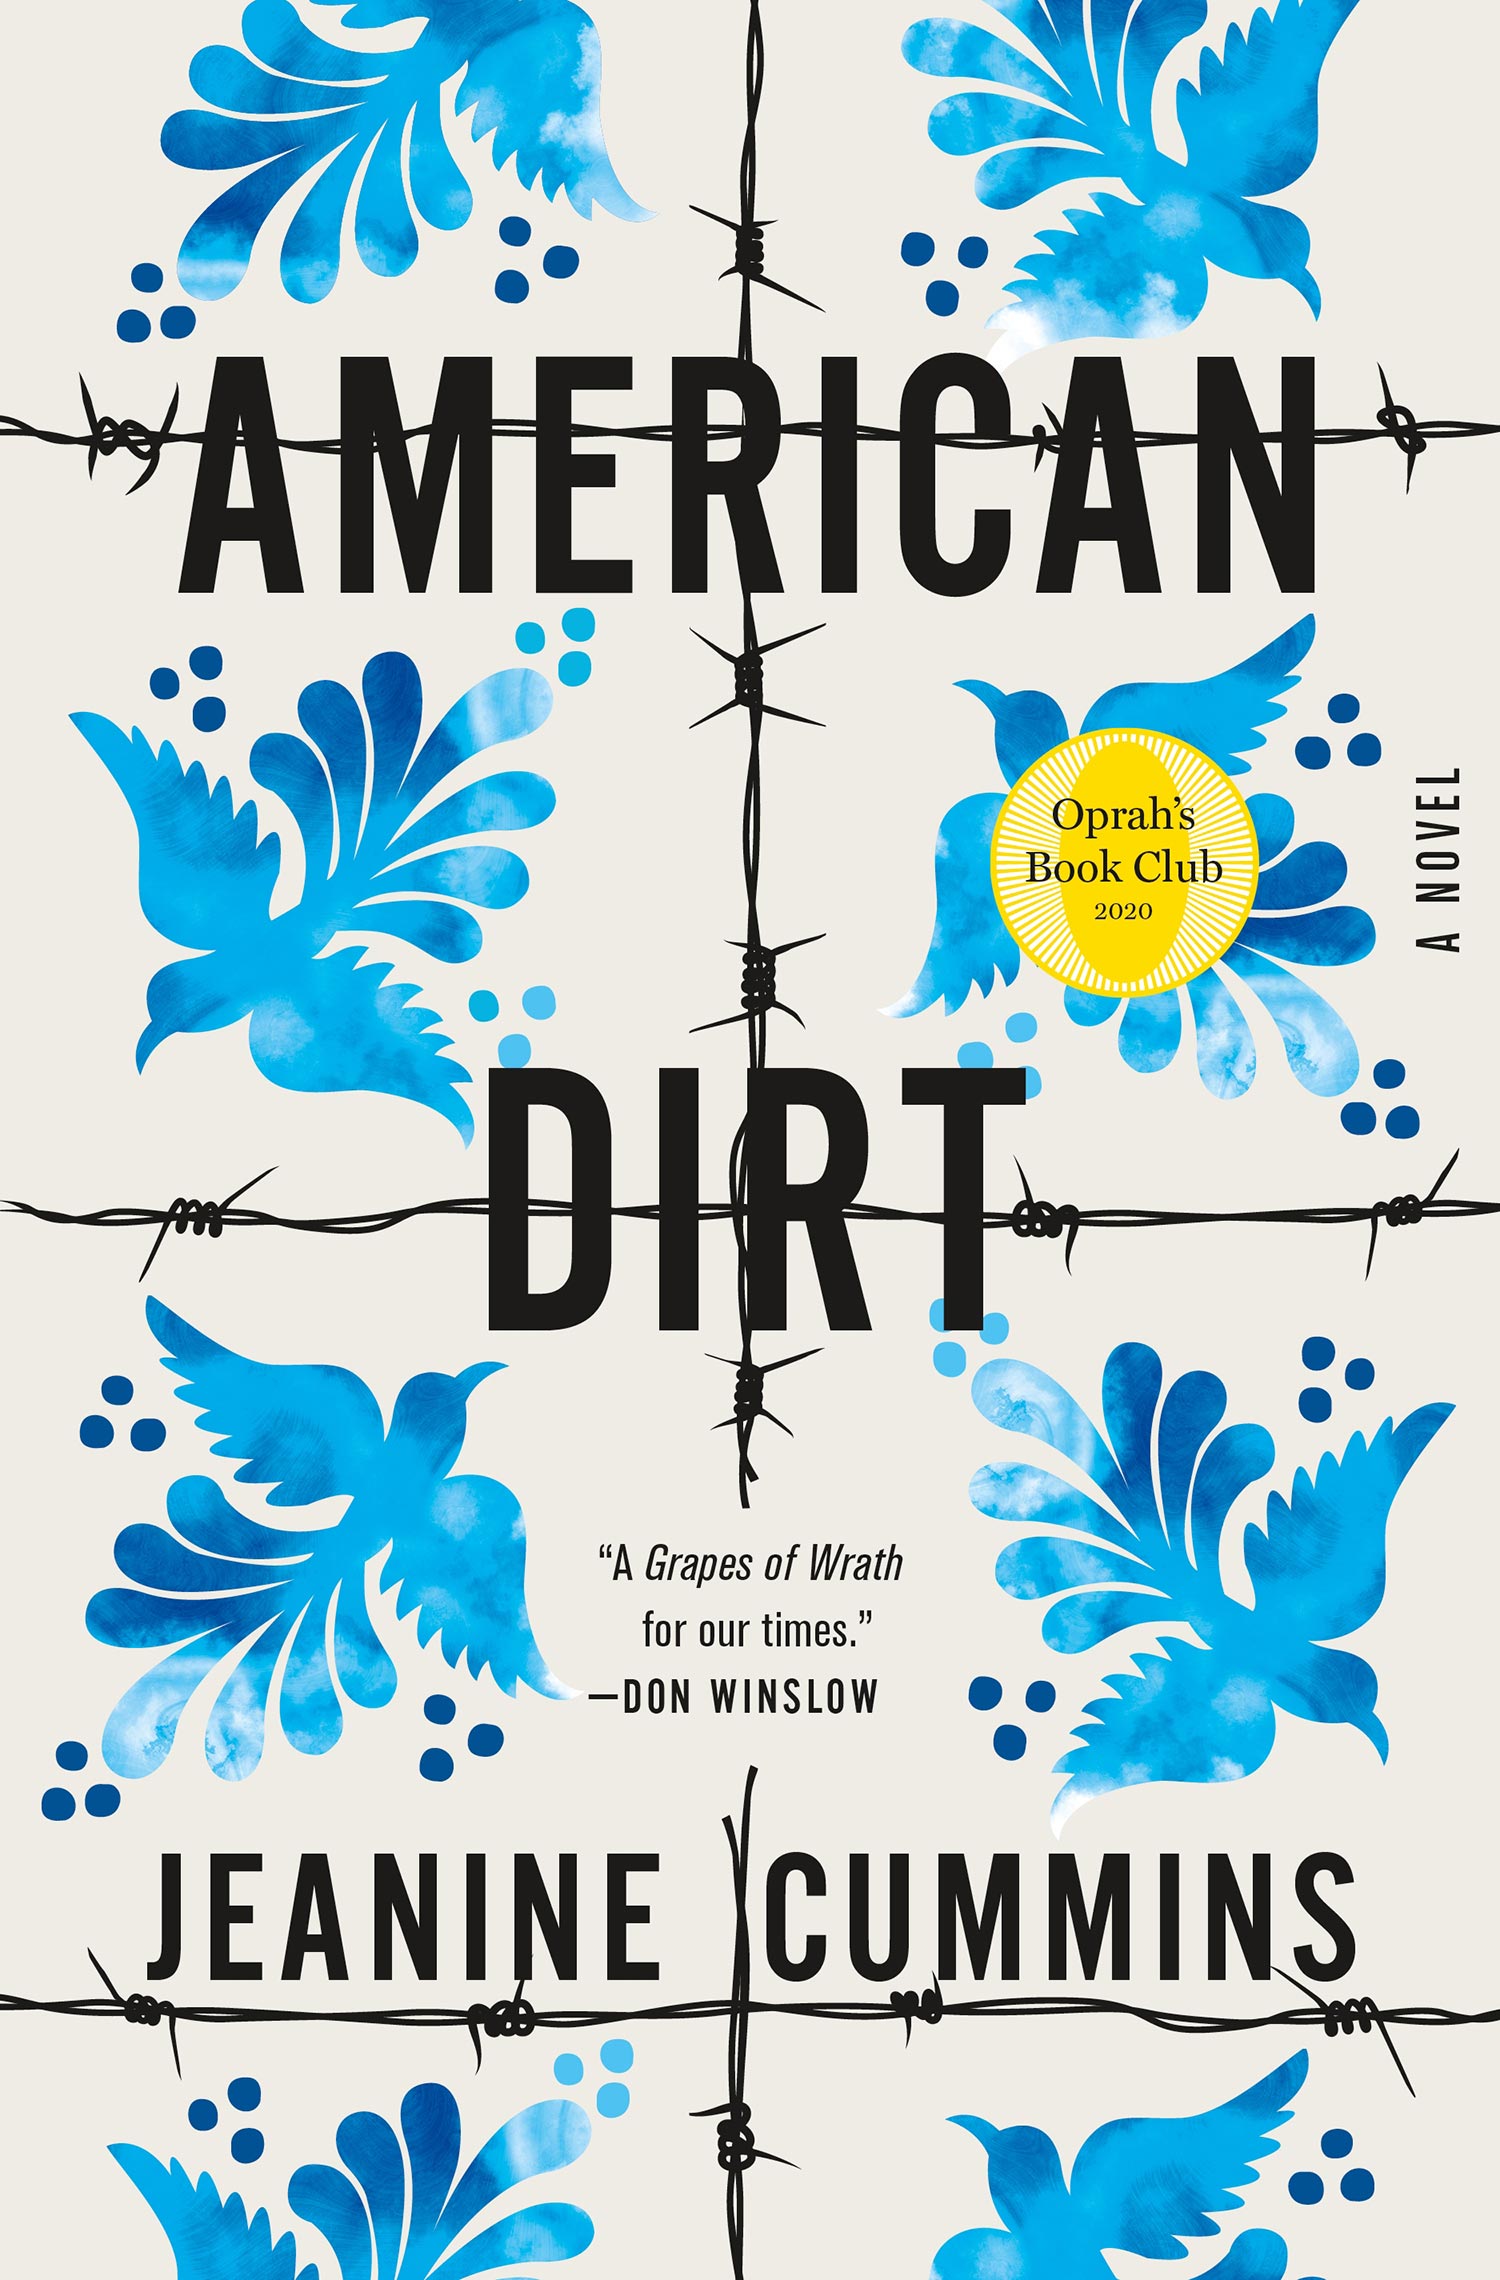 Book cover for 'American Dirt' by Jeanine Cummins with barbed wire and blue dove pattern. Quote from Don Winslow on the cover reads: "A 'Grapes of Wrath' for our times."